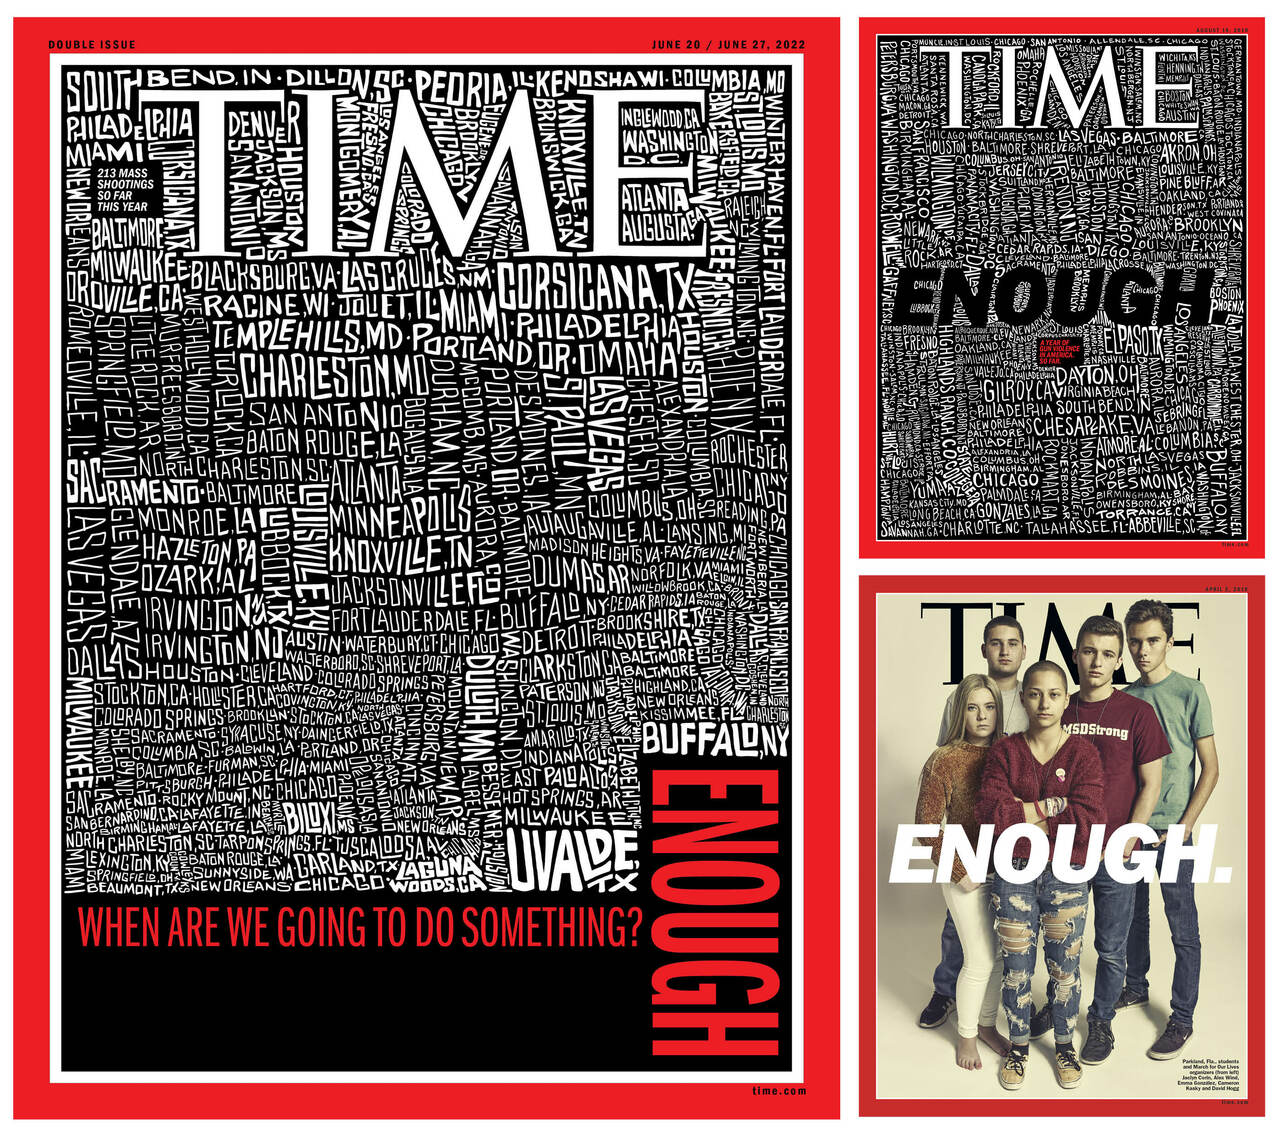 TIME's New Cover Lists Every City That Has Suffered One of America's 213 Mass Shootings So Far This Year